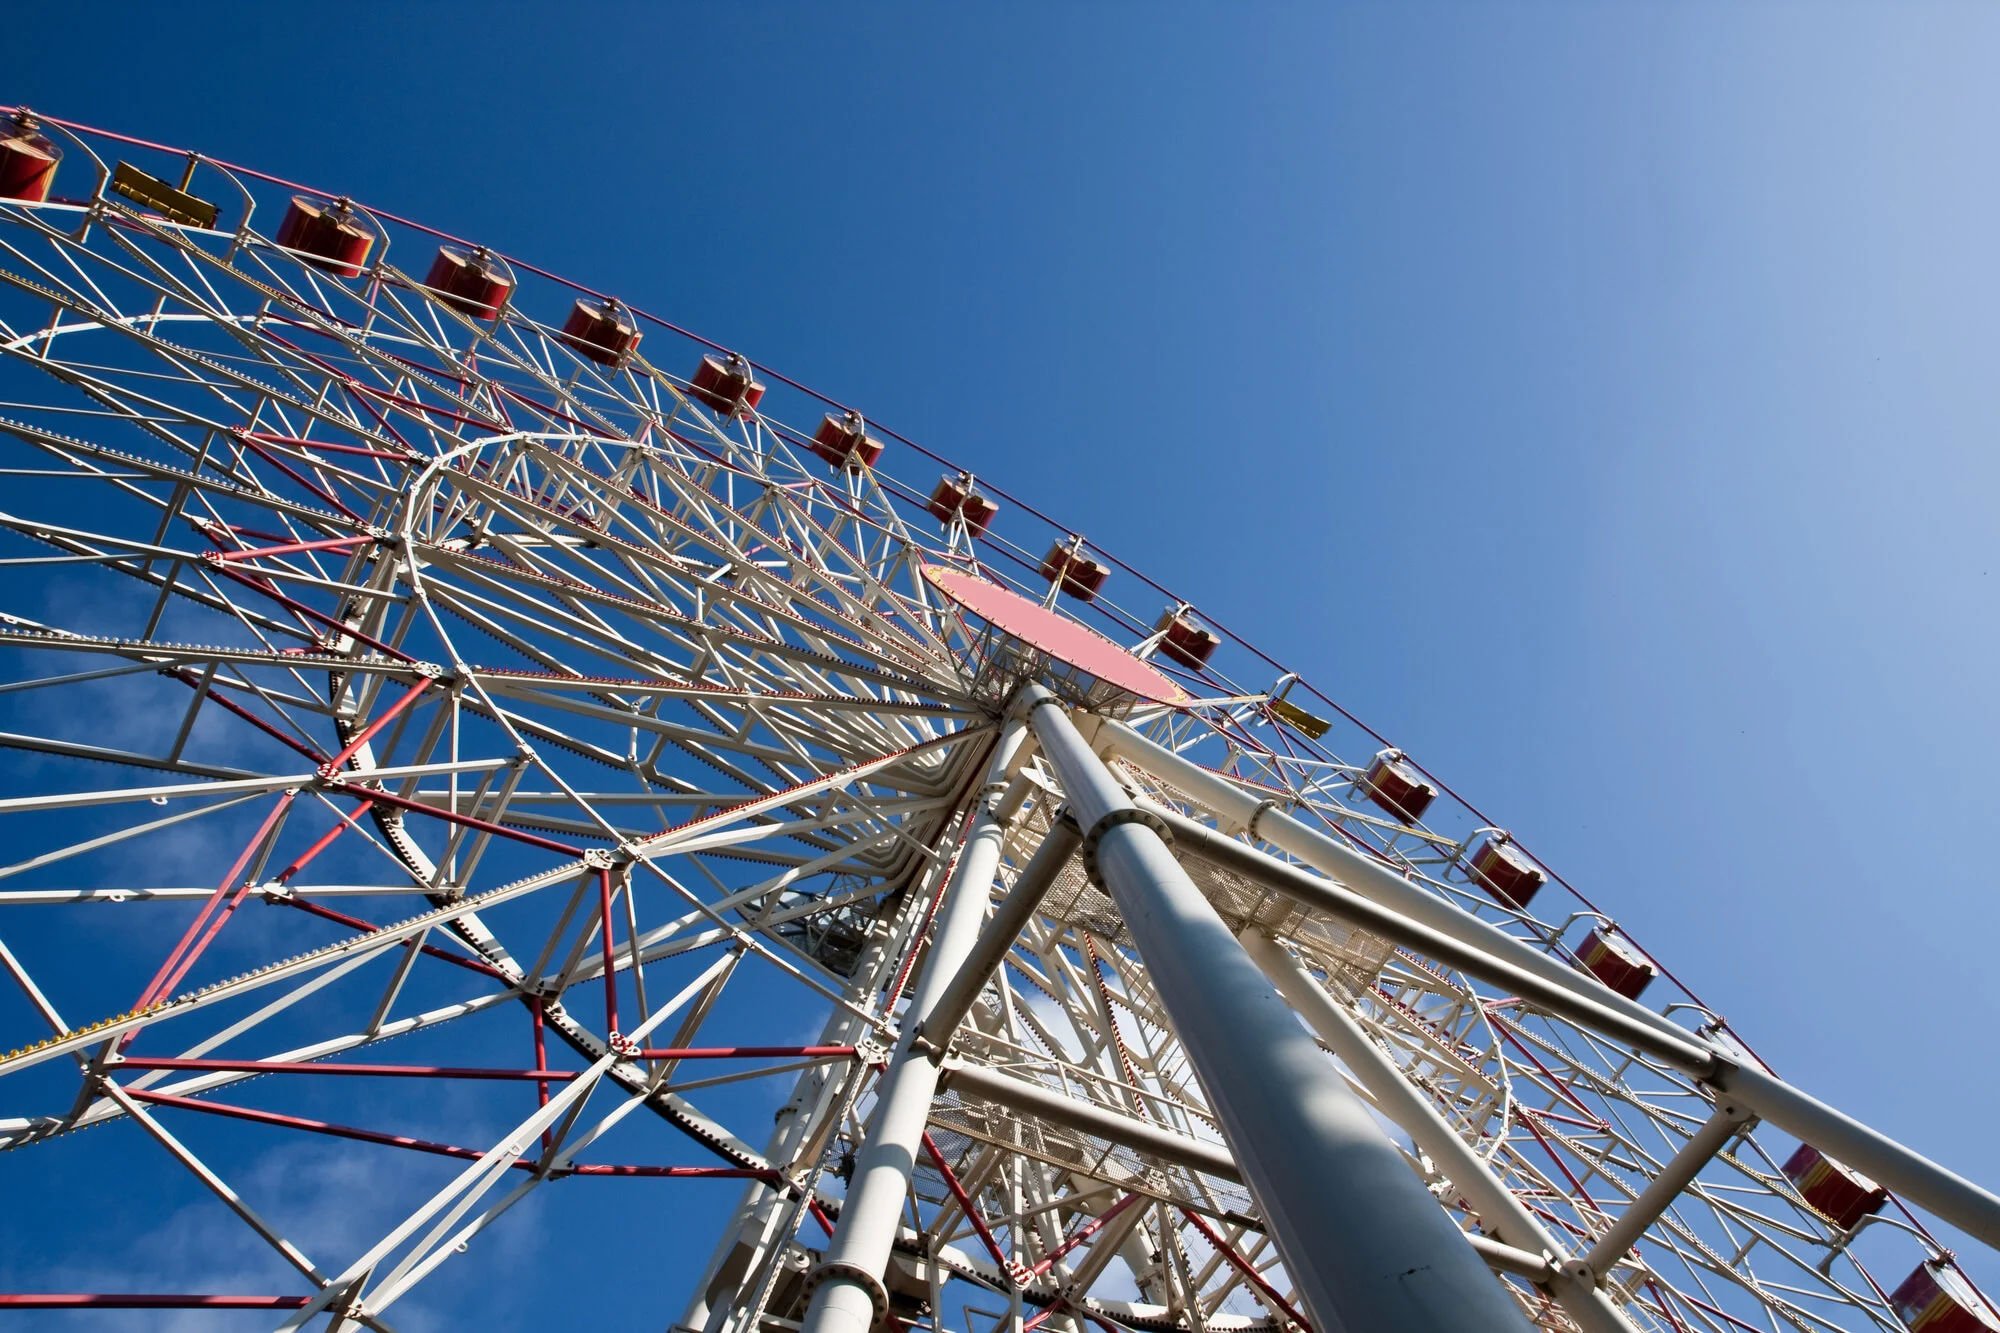 ‘Daring’ couple have sex on Ohio amusement parks ferris wheel, gets arrested